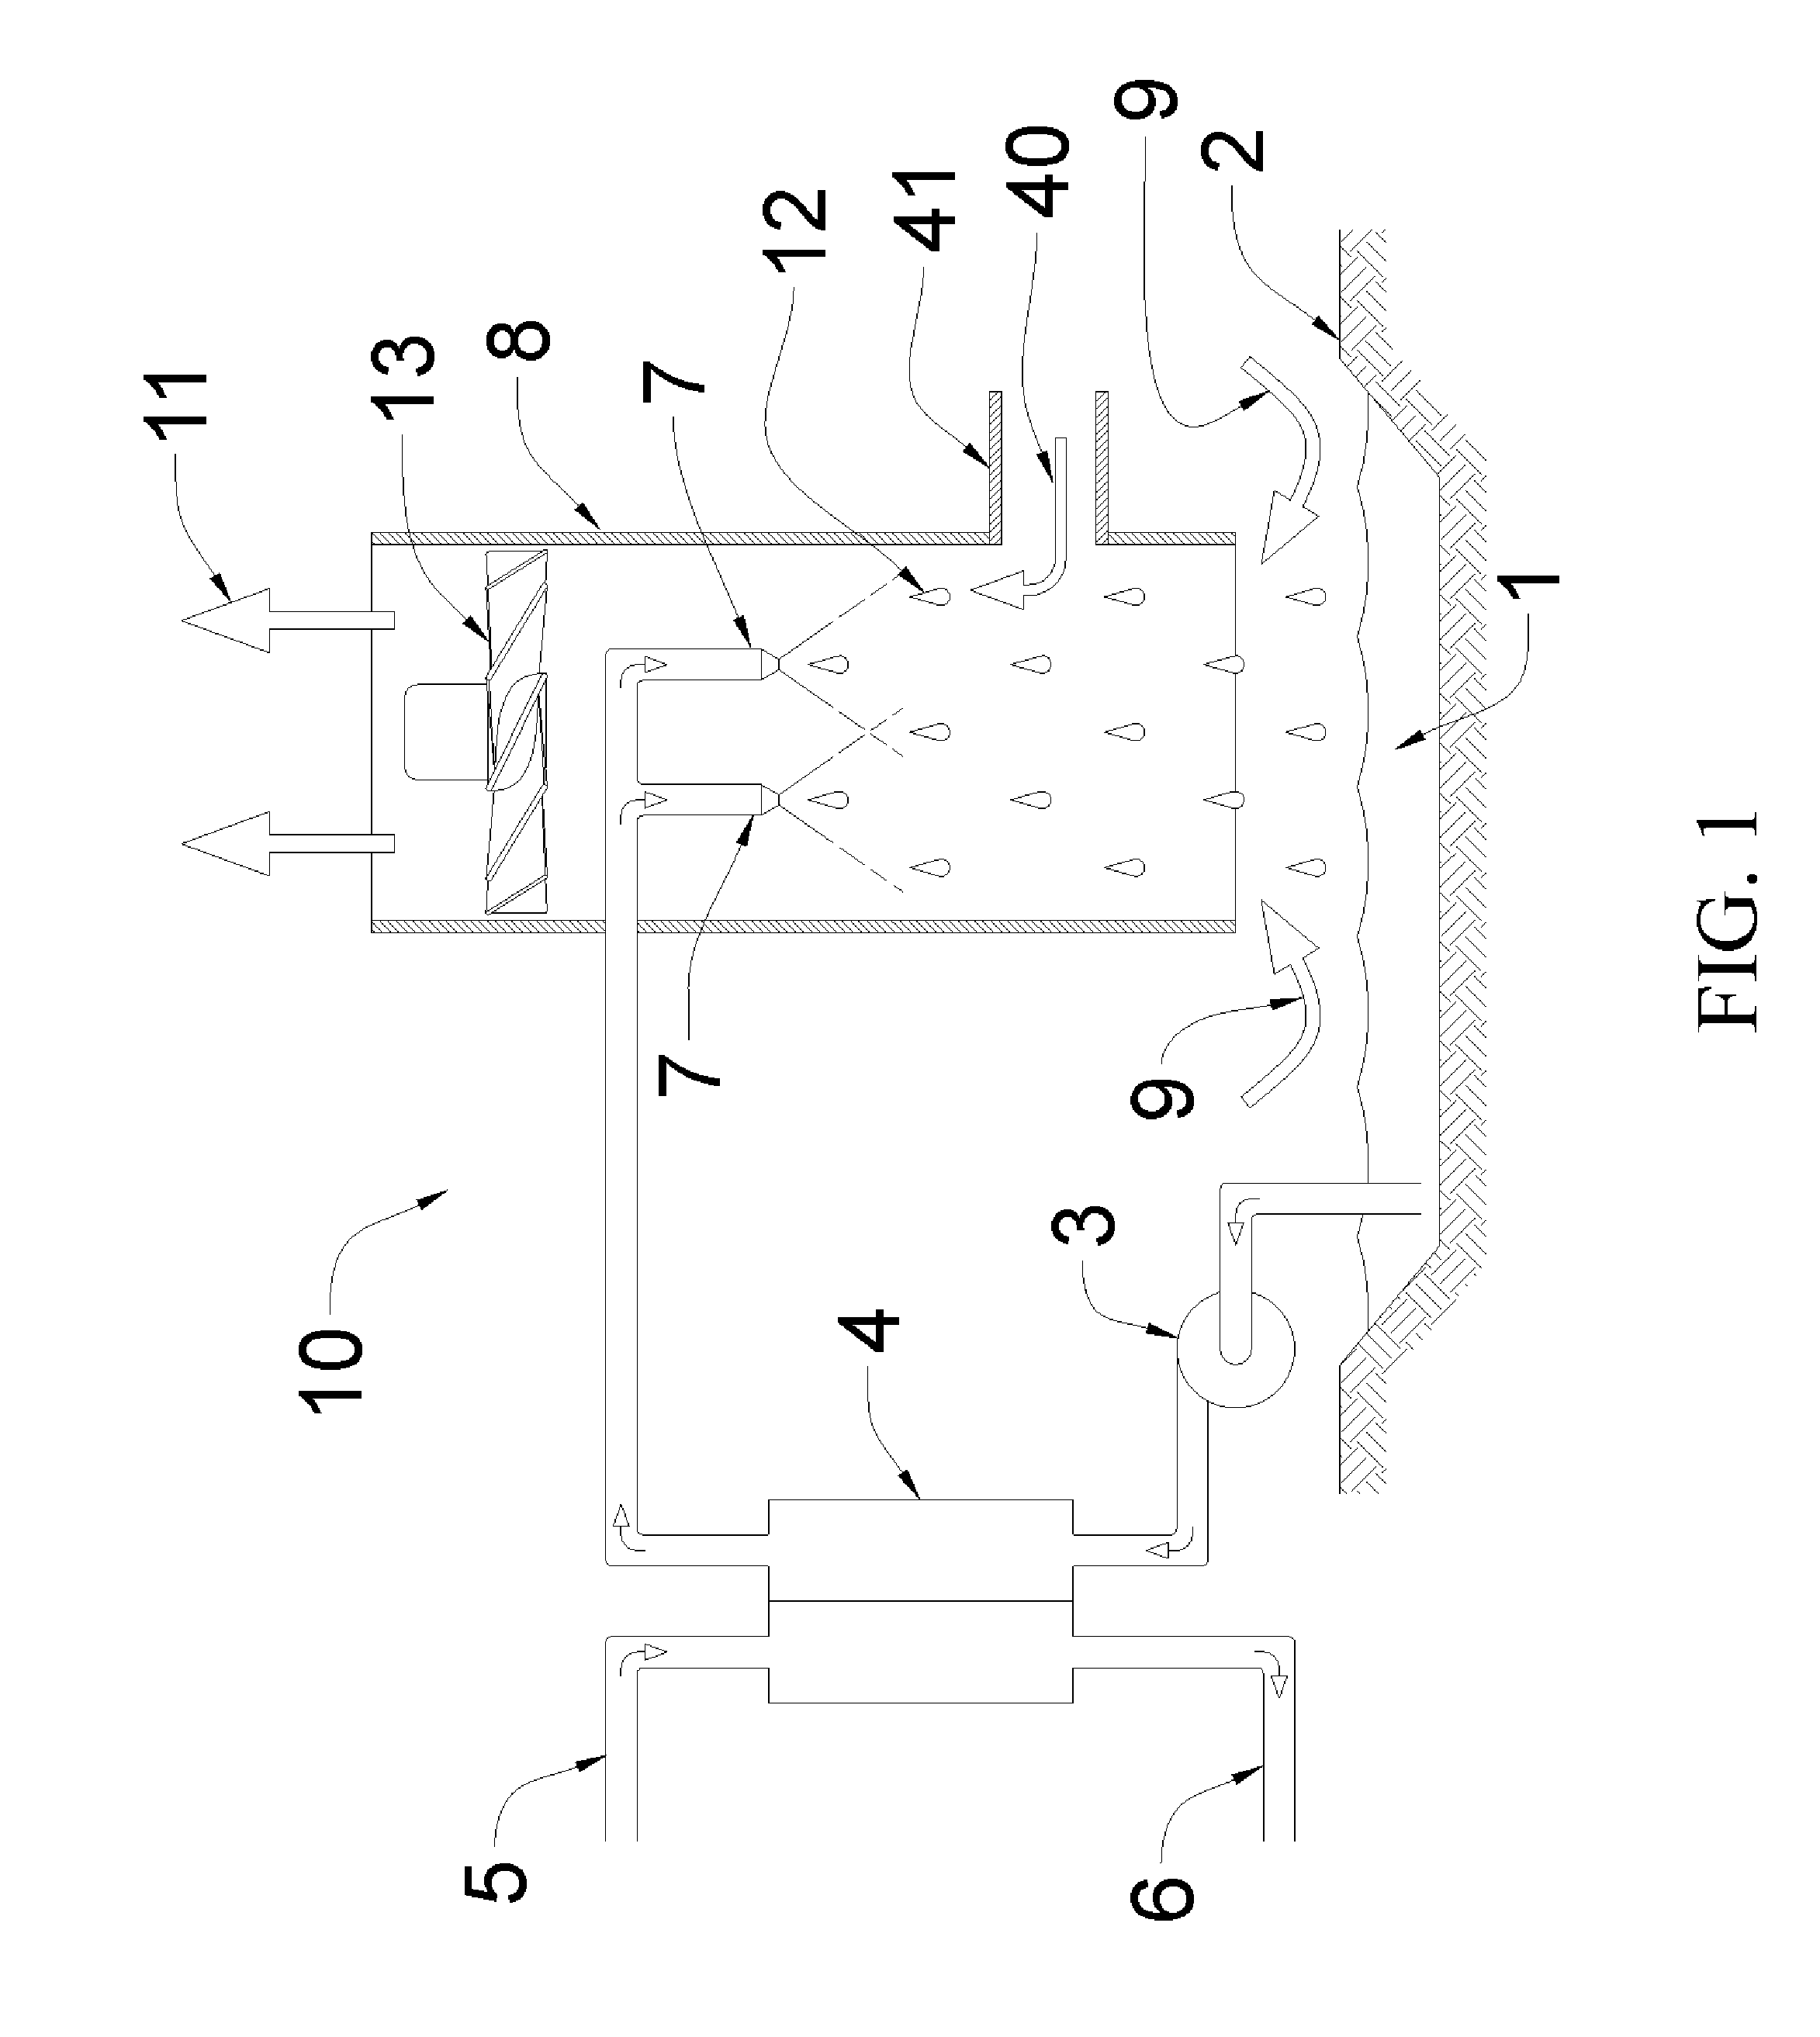 Heat dissipation systems with hygroscopic working fluid